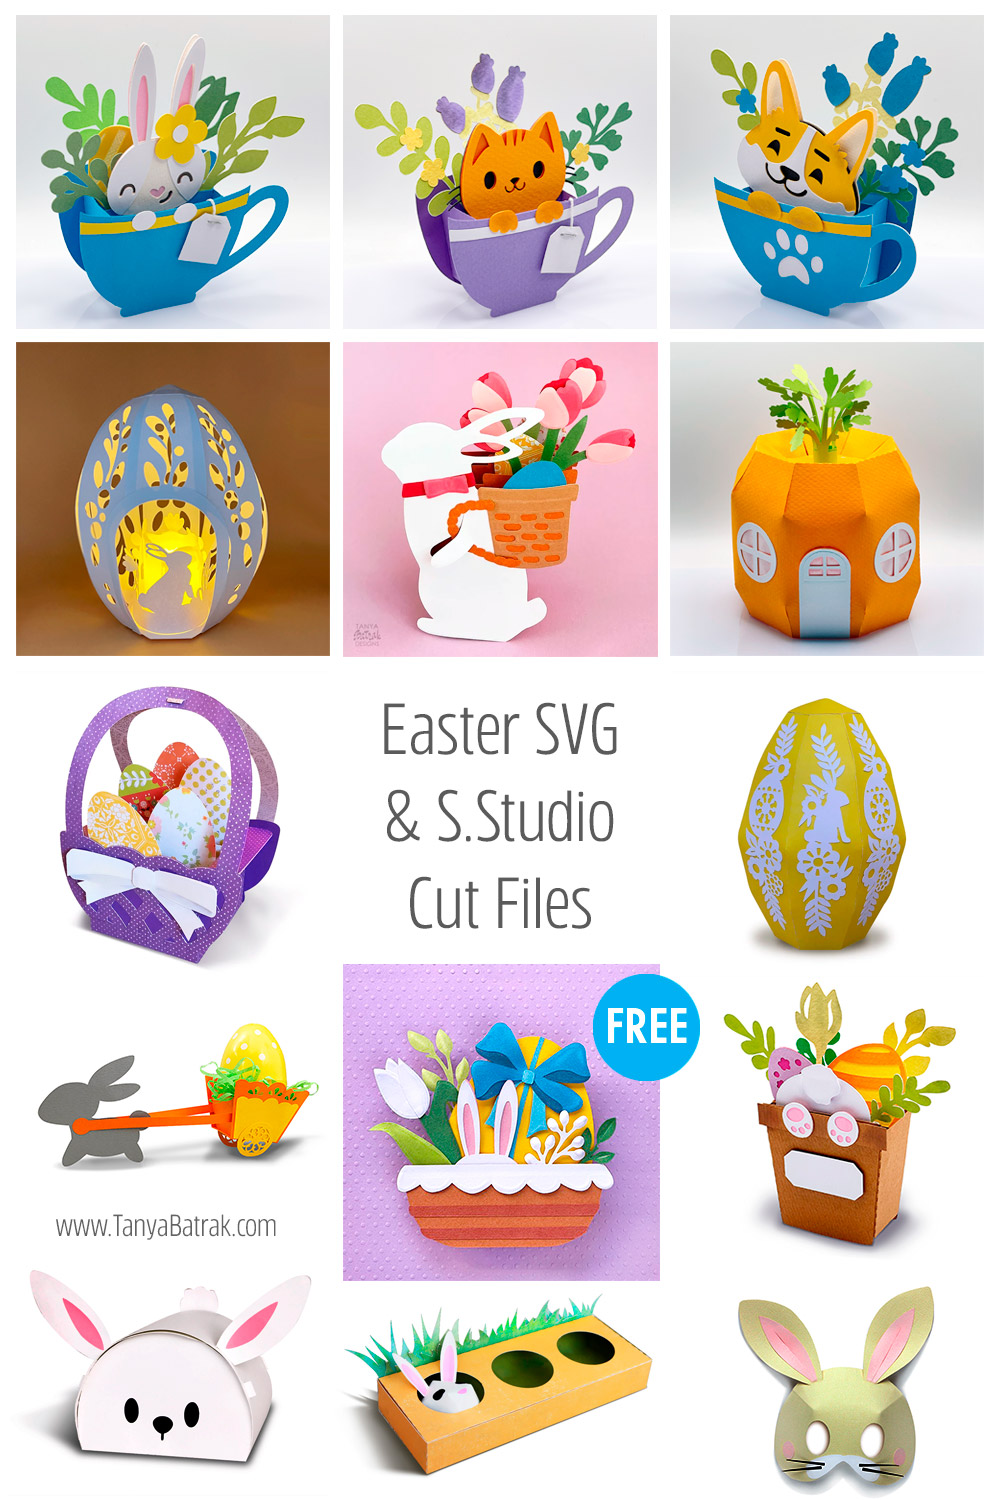 FREE Easter SVG Cut Files for Cricut and Silhouette